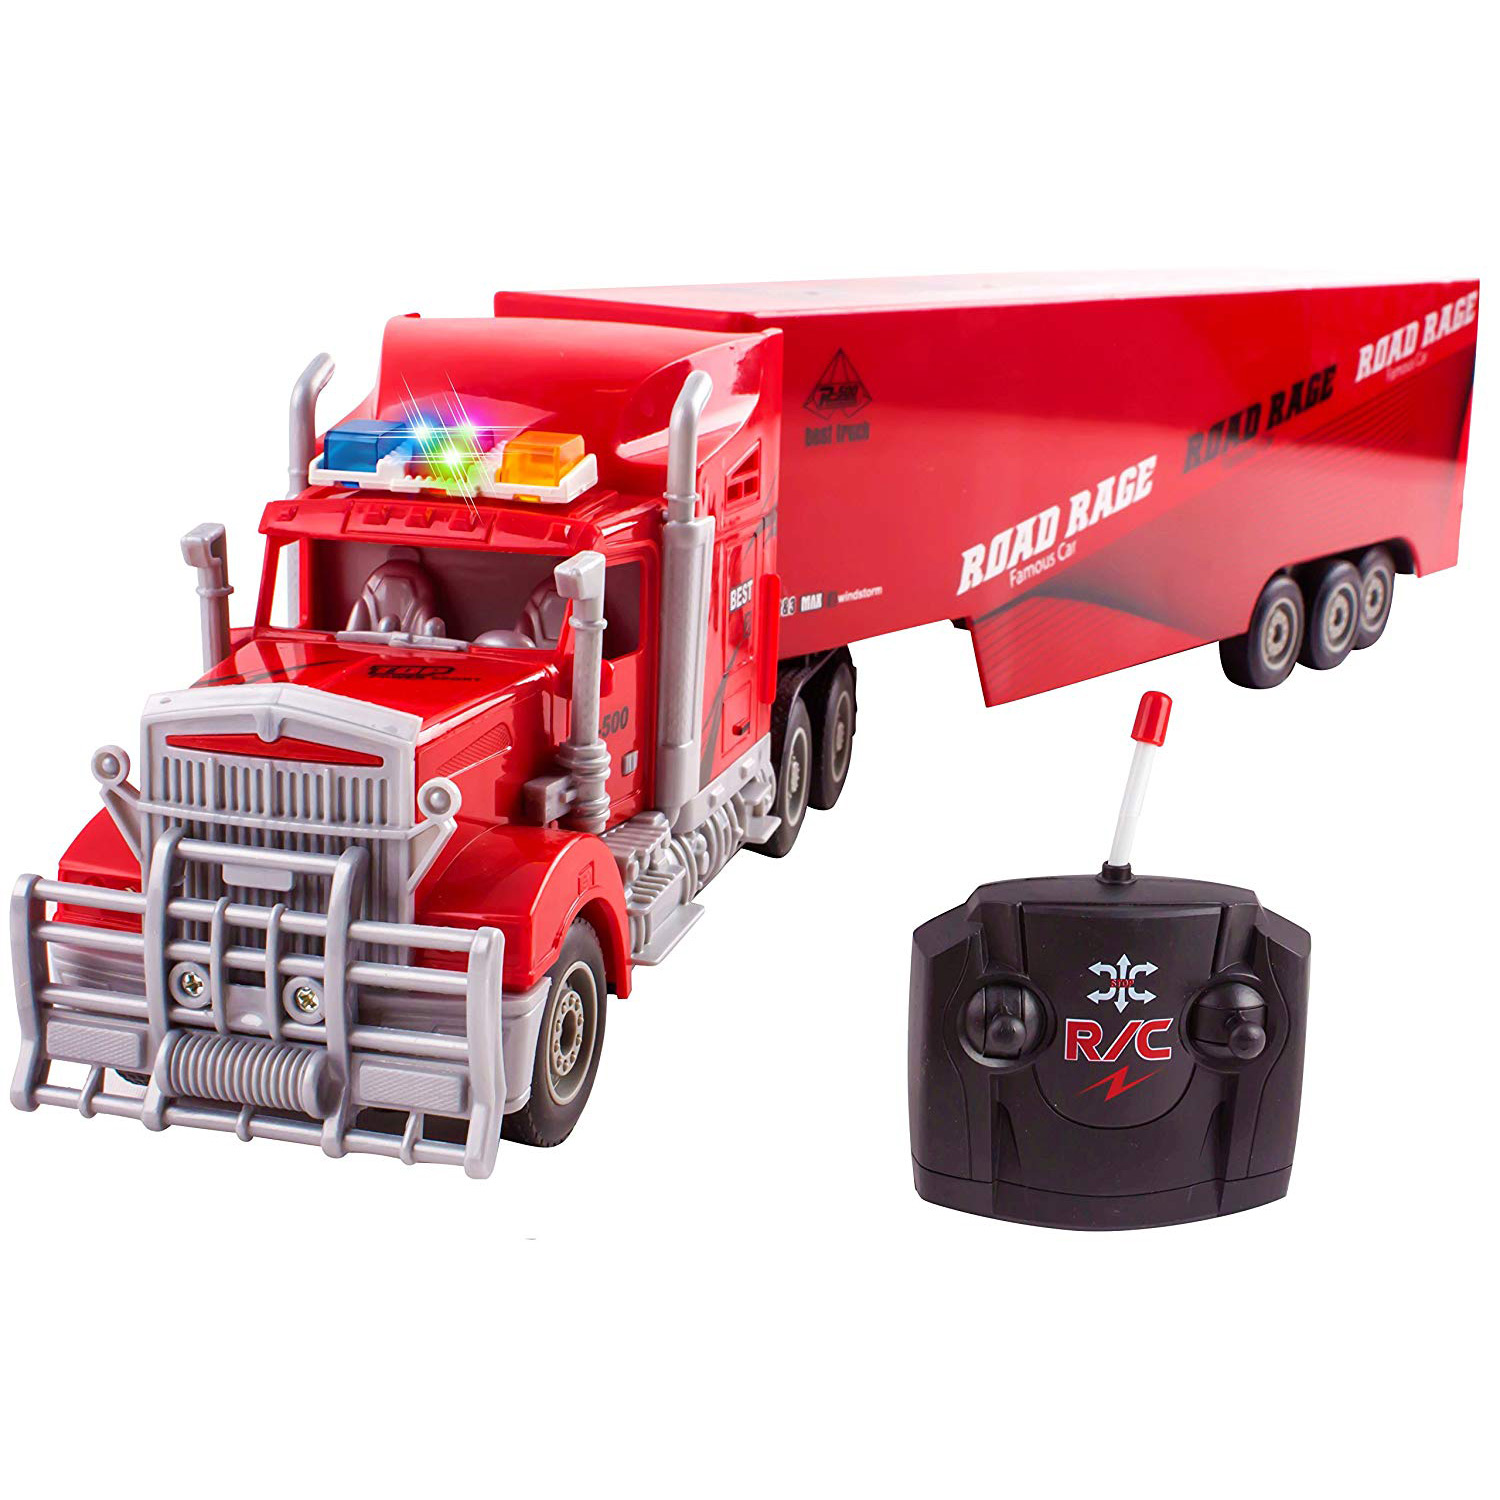 Toy Semi Truck Trailer 23" Electric Hauler Remote Control RC Childrenâ€™s Transporter Ready To Run Full Cargo Perfect Big Rig For Kids Toys (Red)